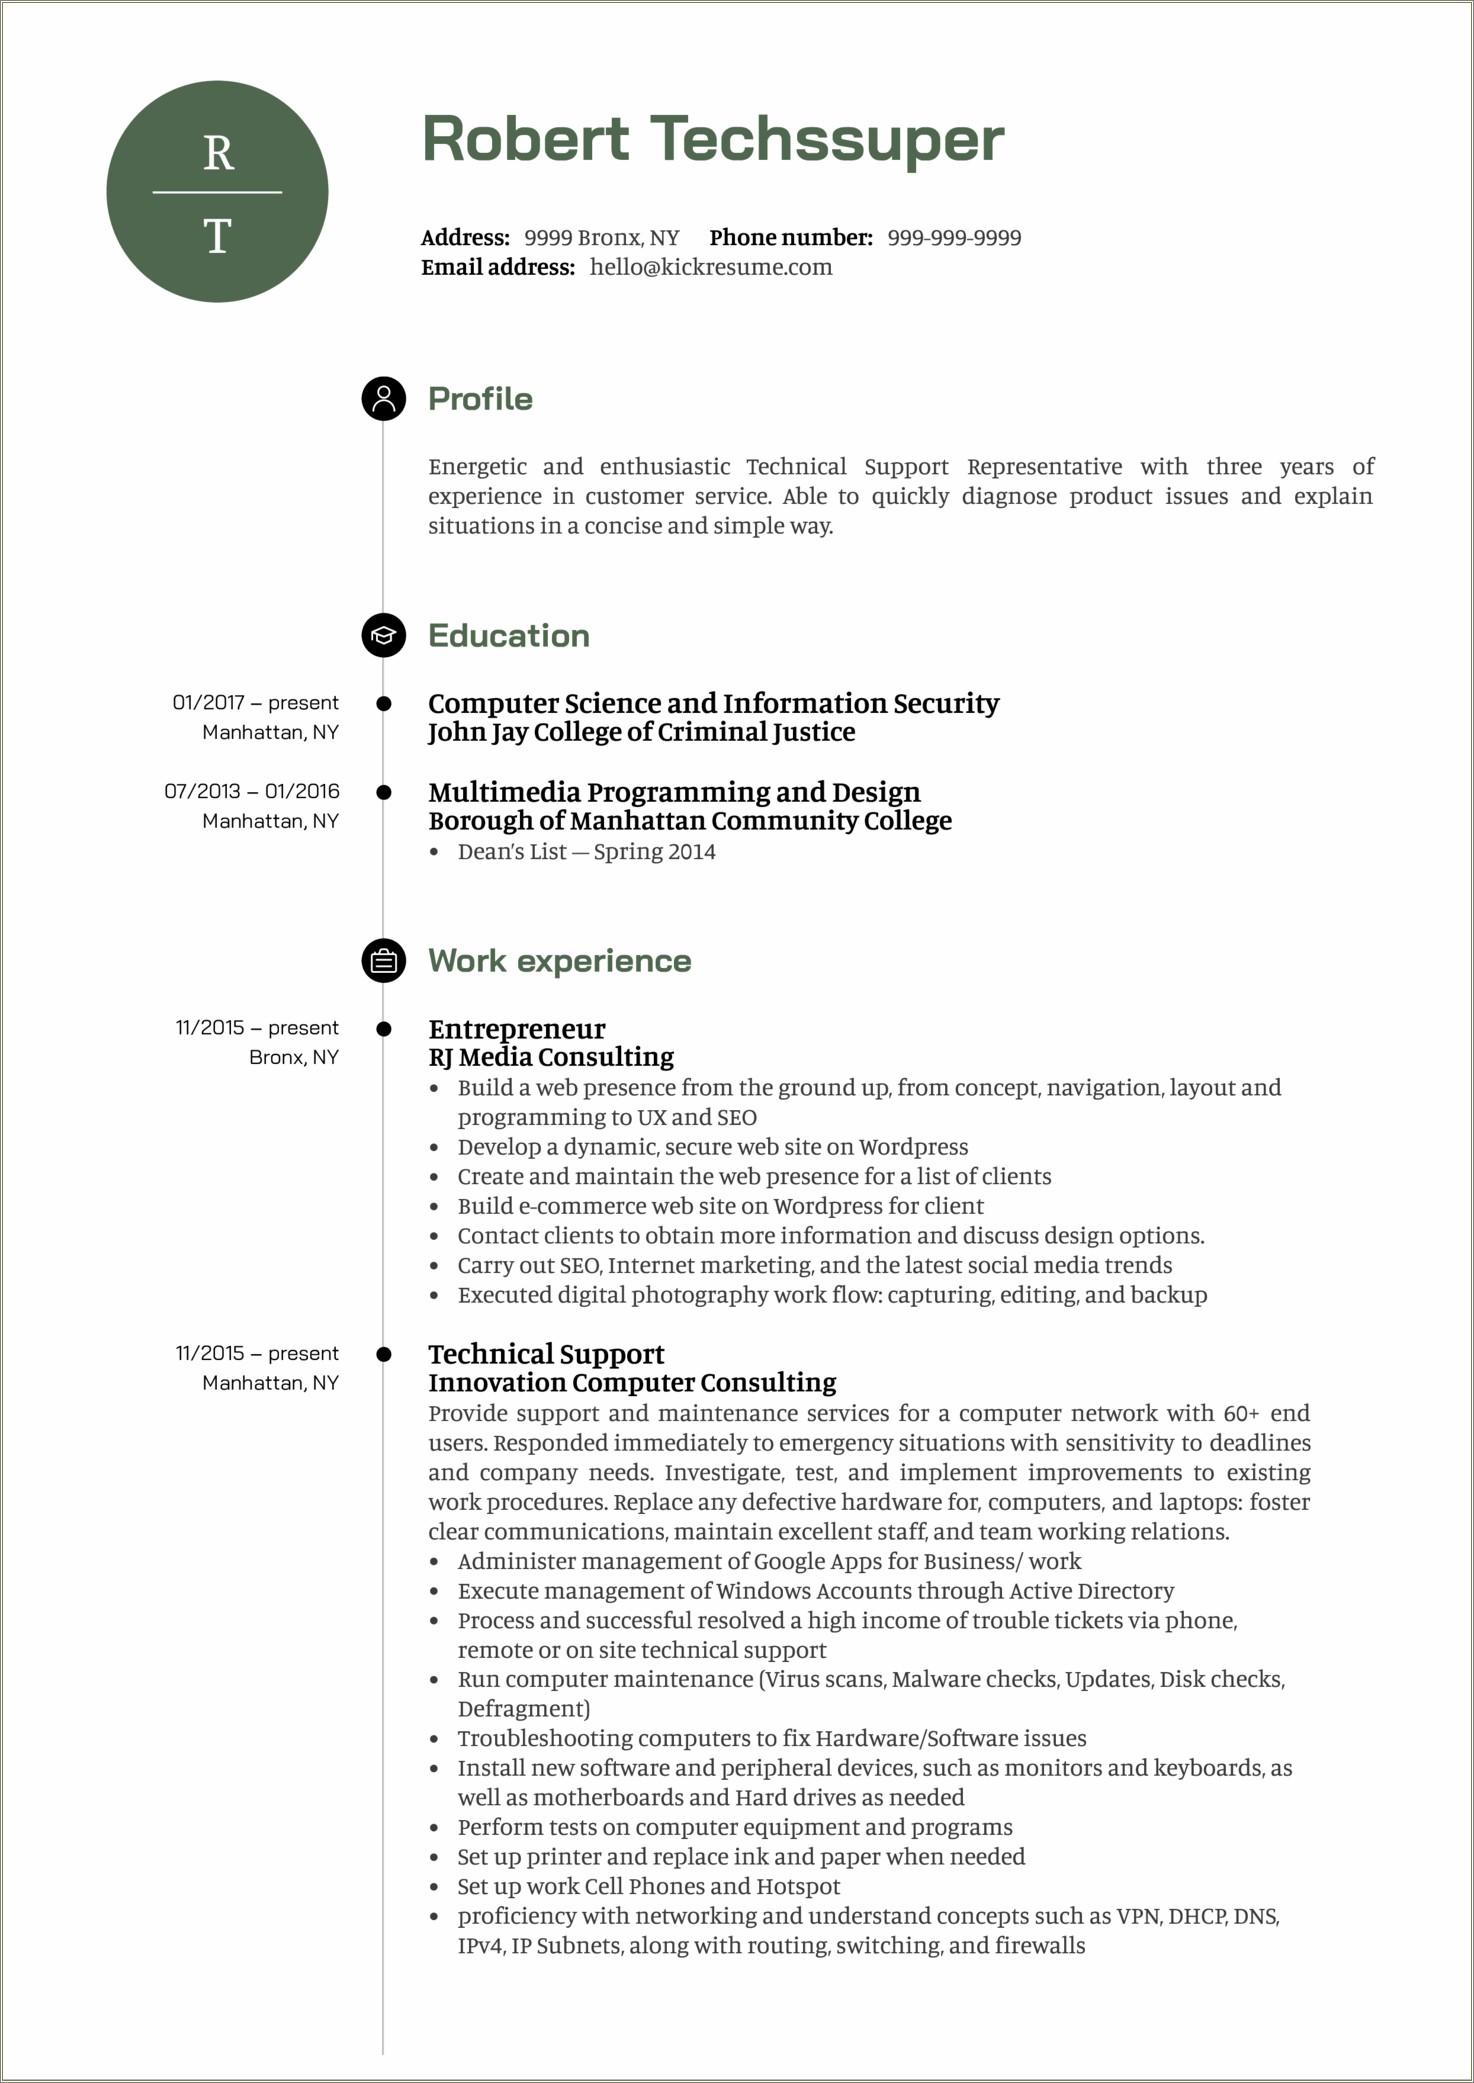 Customer Service Professional Profile Examples For Resume